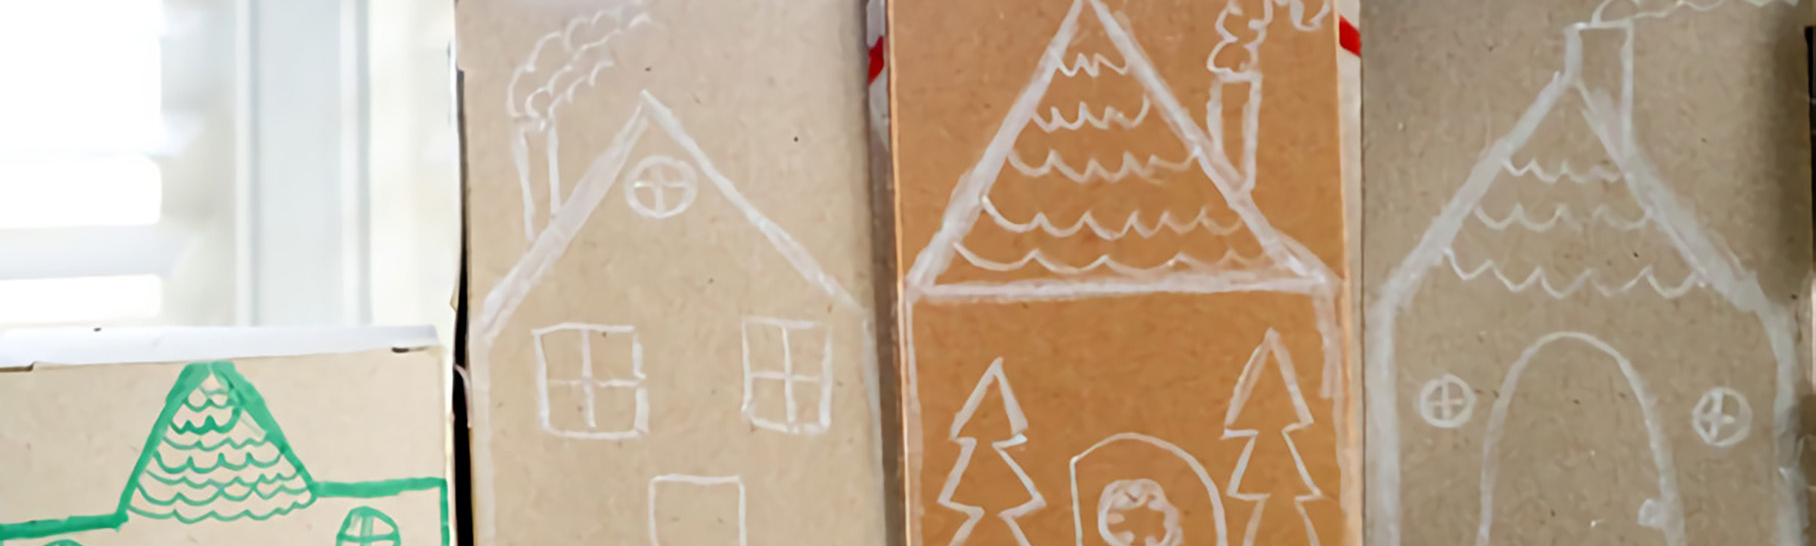 Brown boxes turned upside down and drawn on to resemble a gingerbread village.